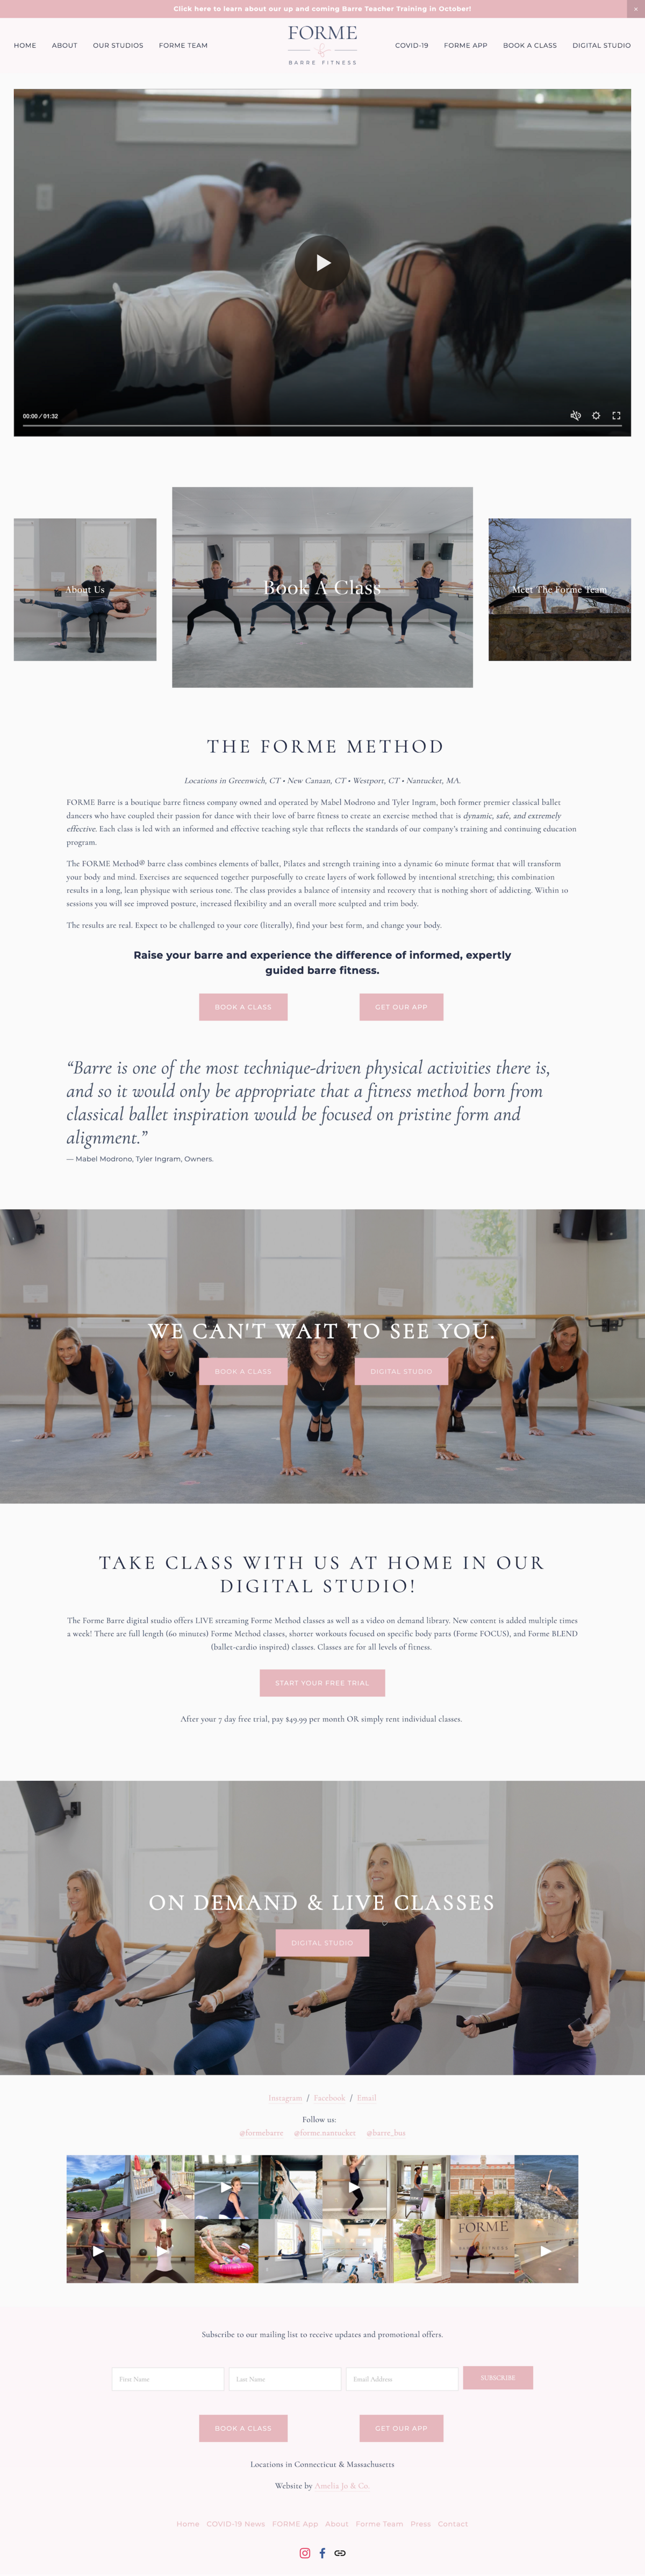 Homepage of Forme Barre website featuring a informational video and studio  imagery